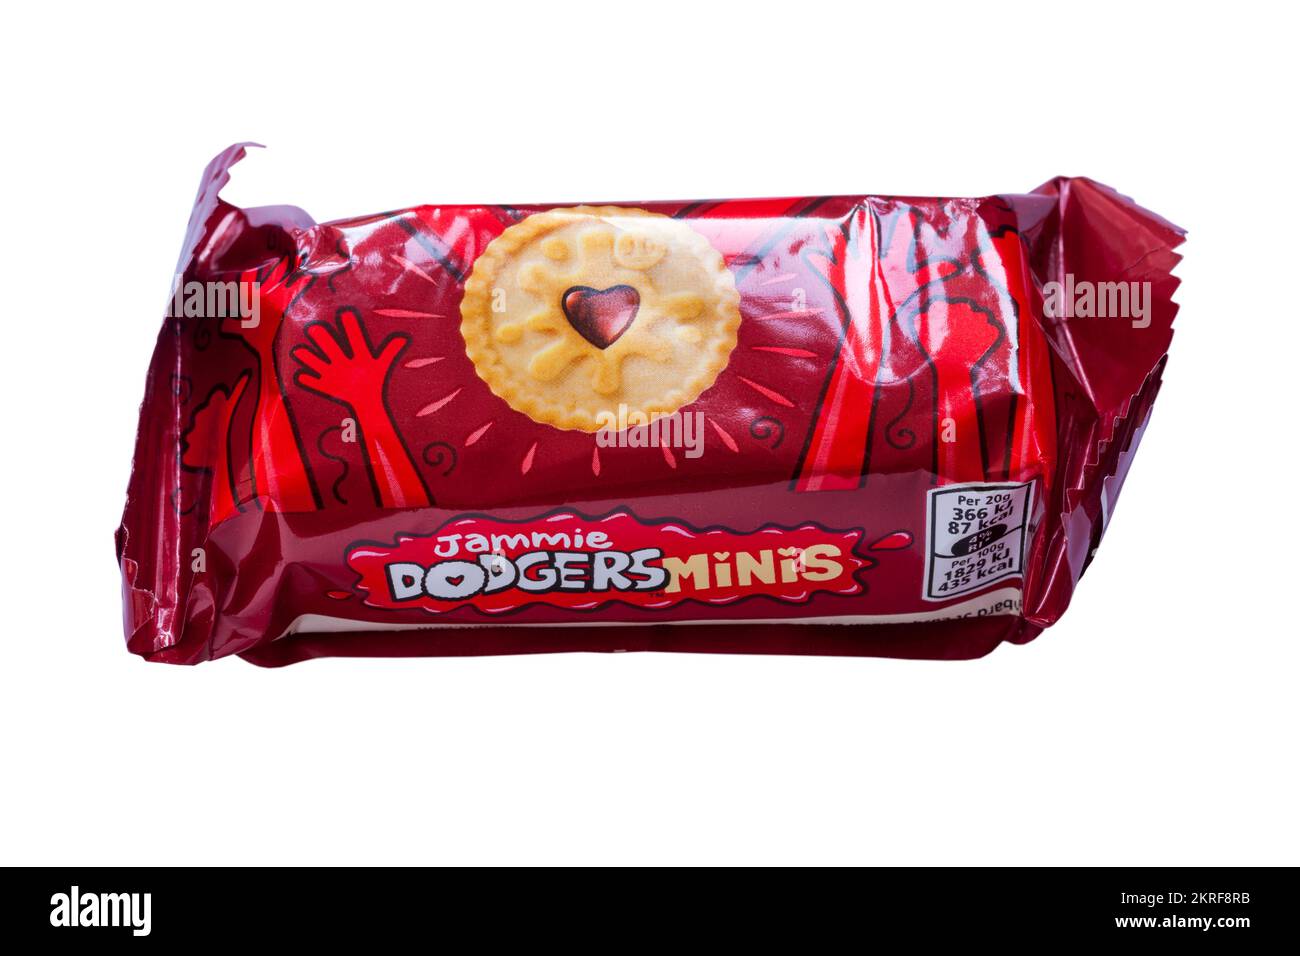 Jammie Dodgers Minis raspberry flavour snack pack isolated on white background Stock Photo